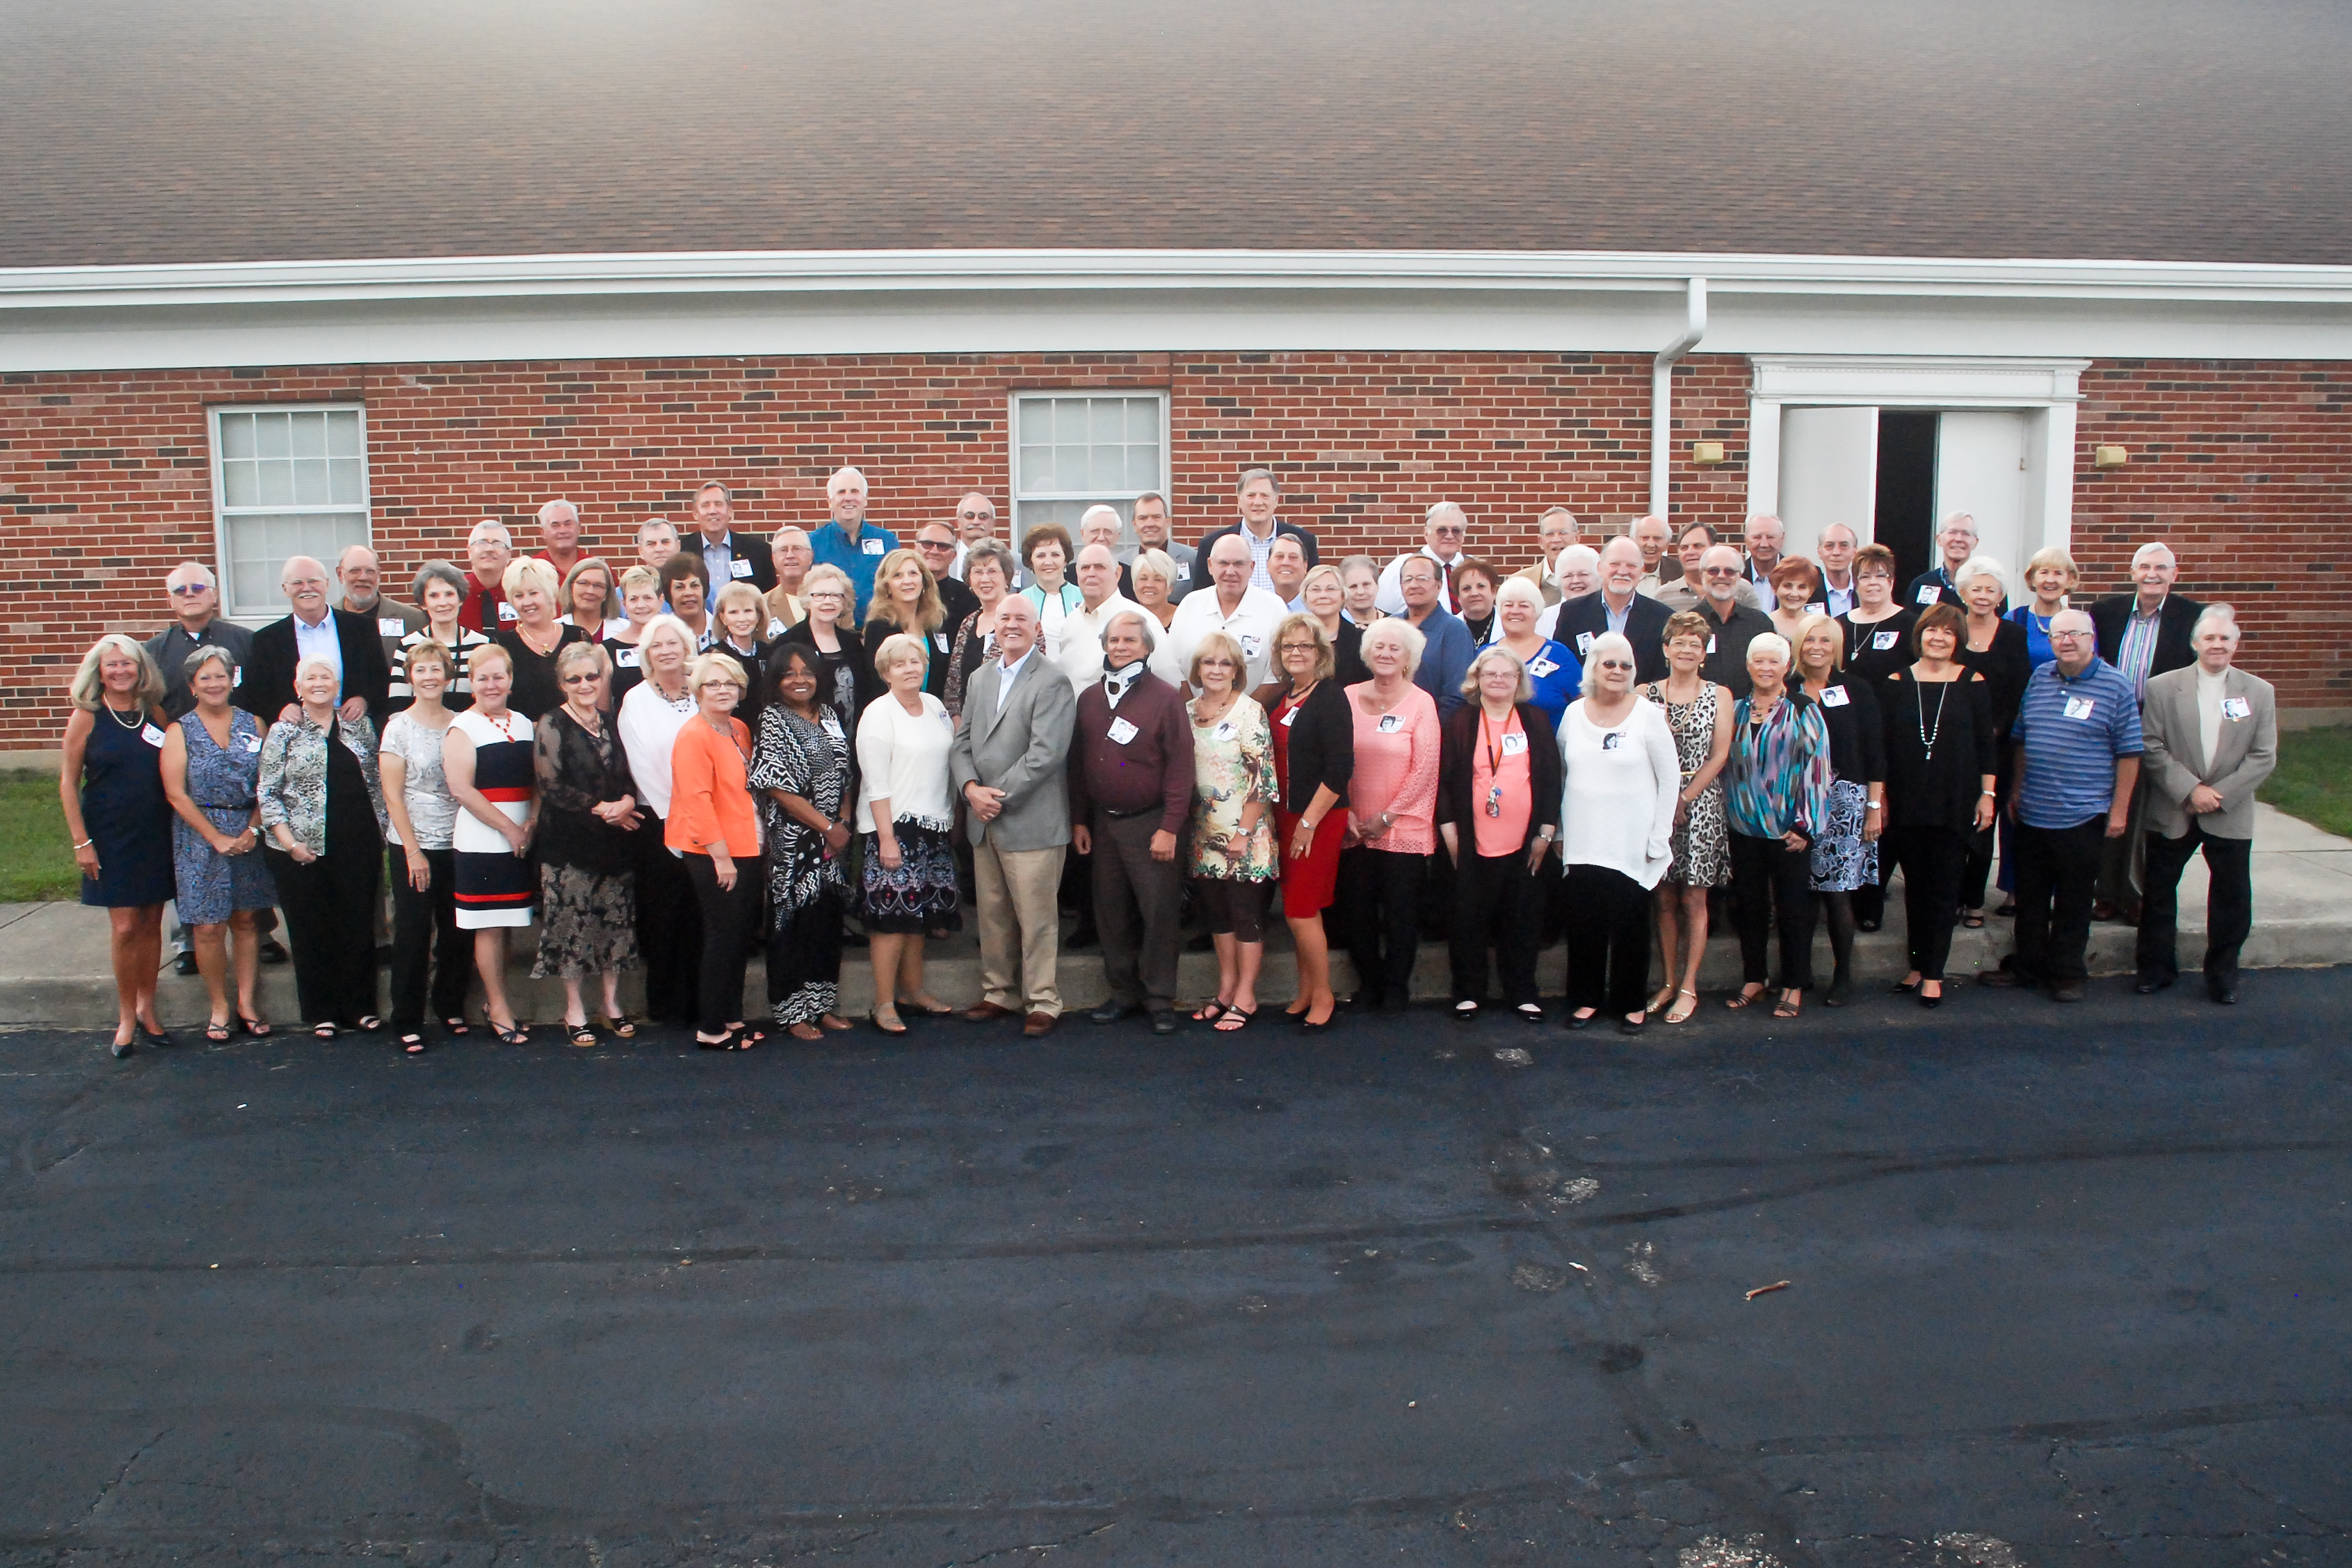 WCHS Class of 1965 50th Reunion on September 12th, 2015

(Click on picture 2x to enlarge)